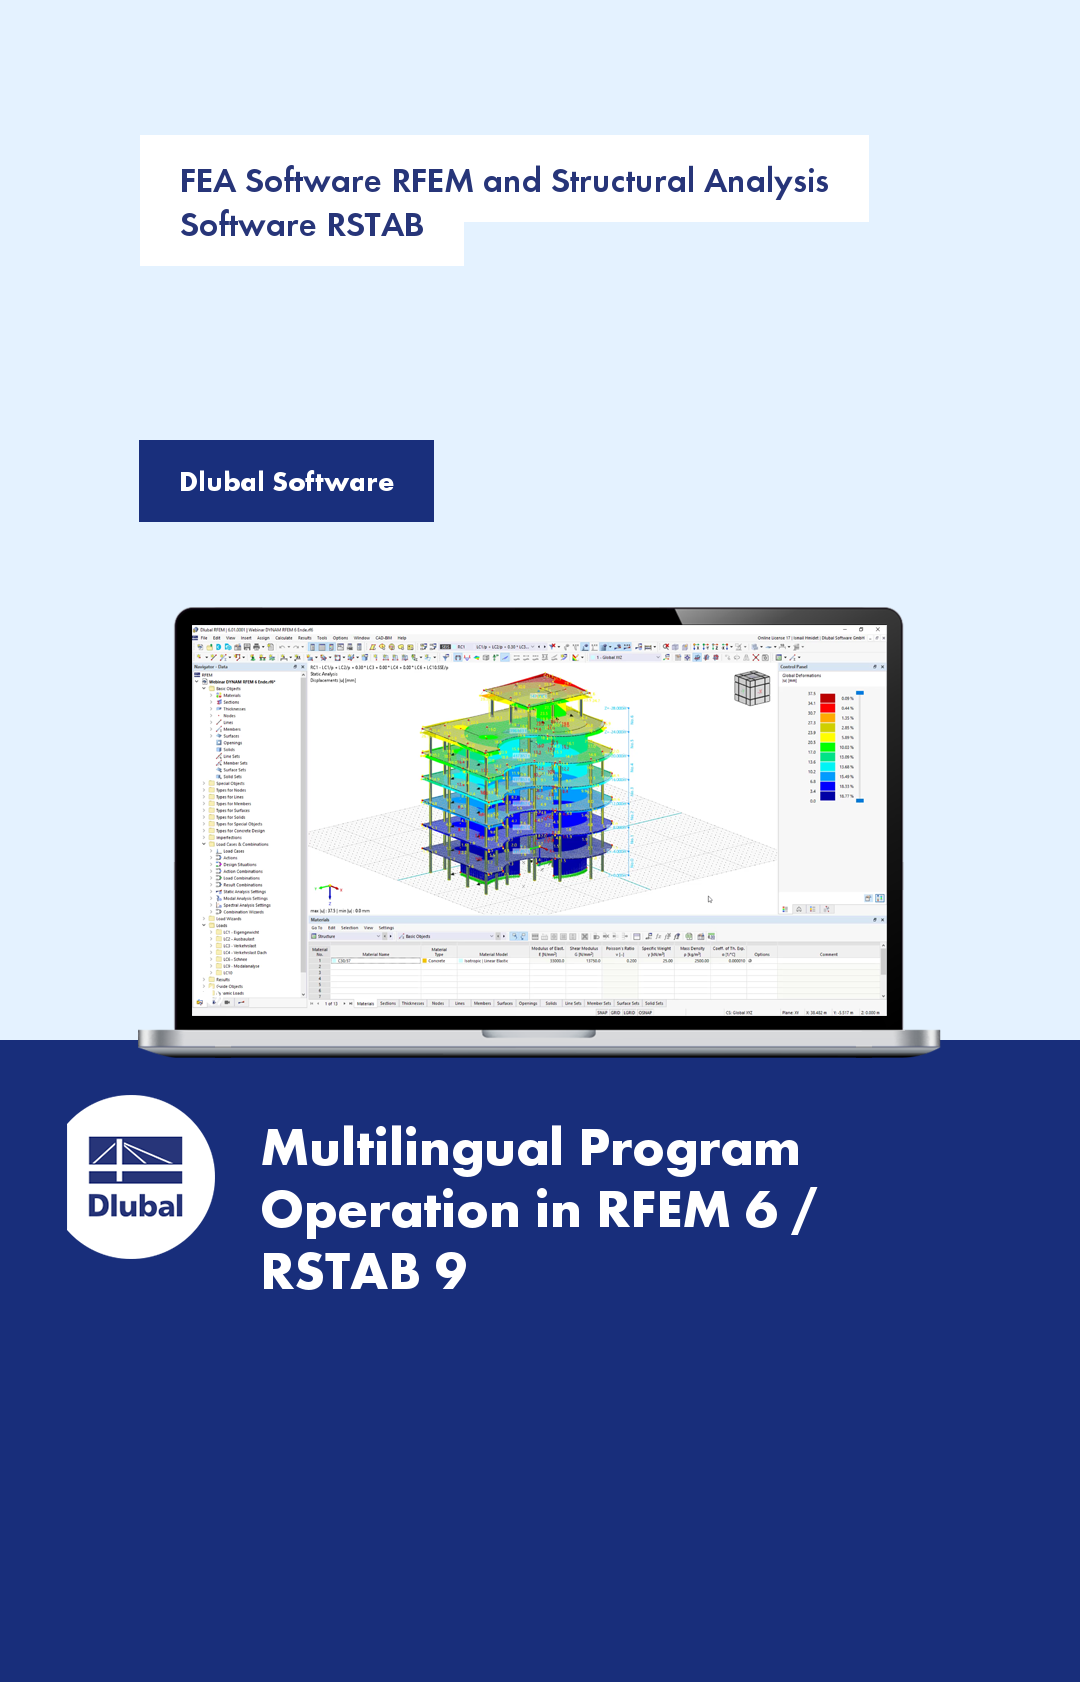 FEA Software RFEM and Structural Analysis Software RSTAB